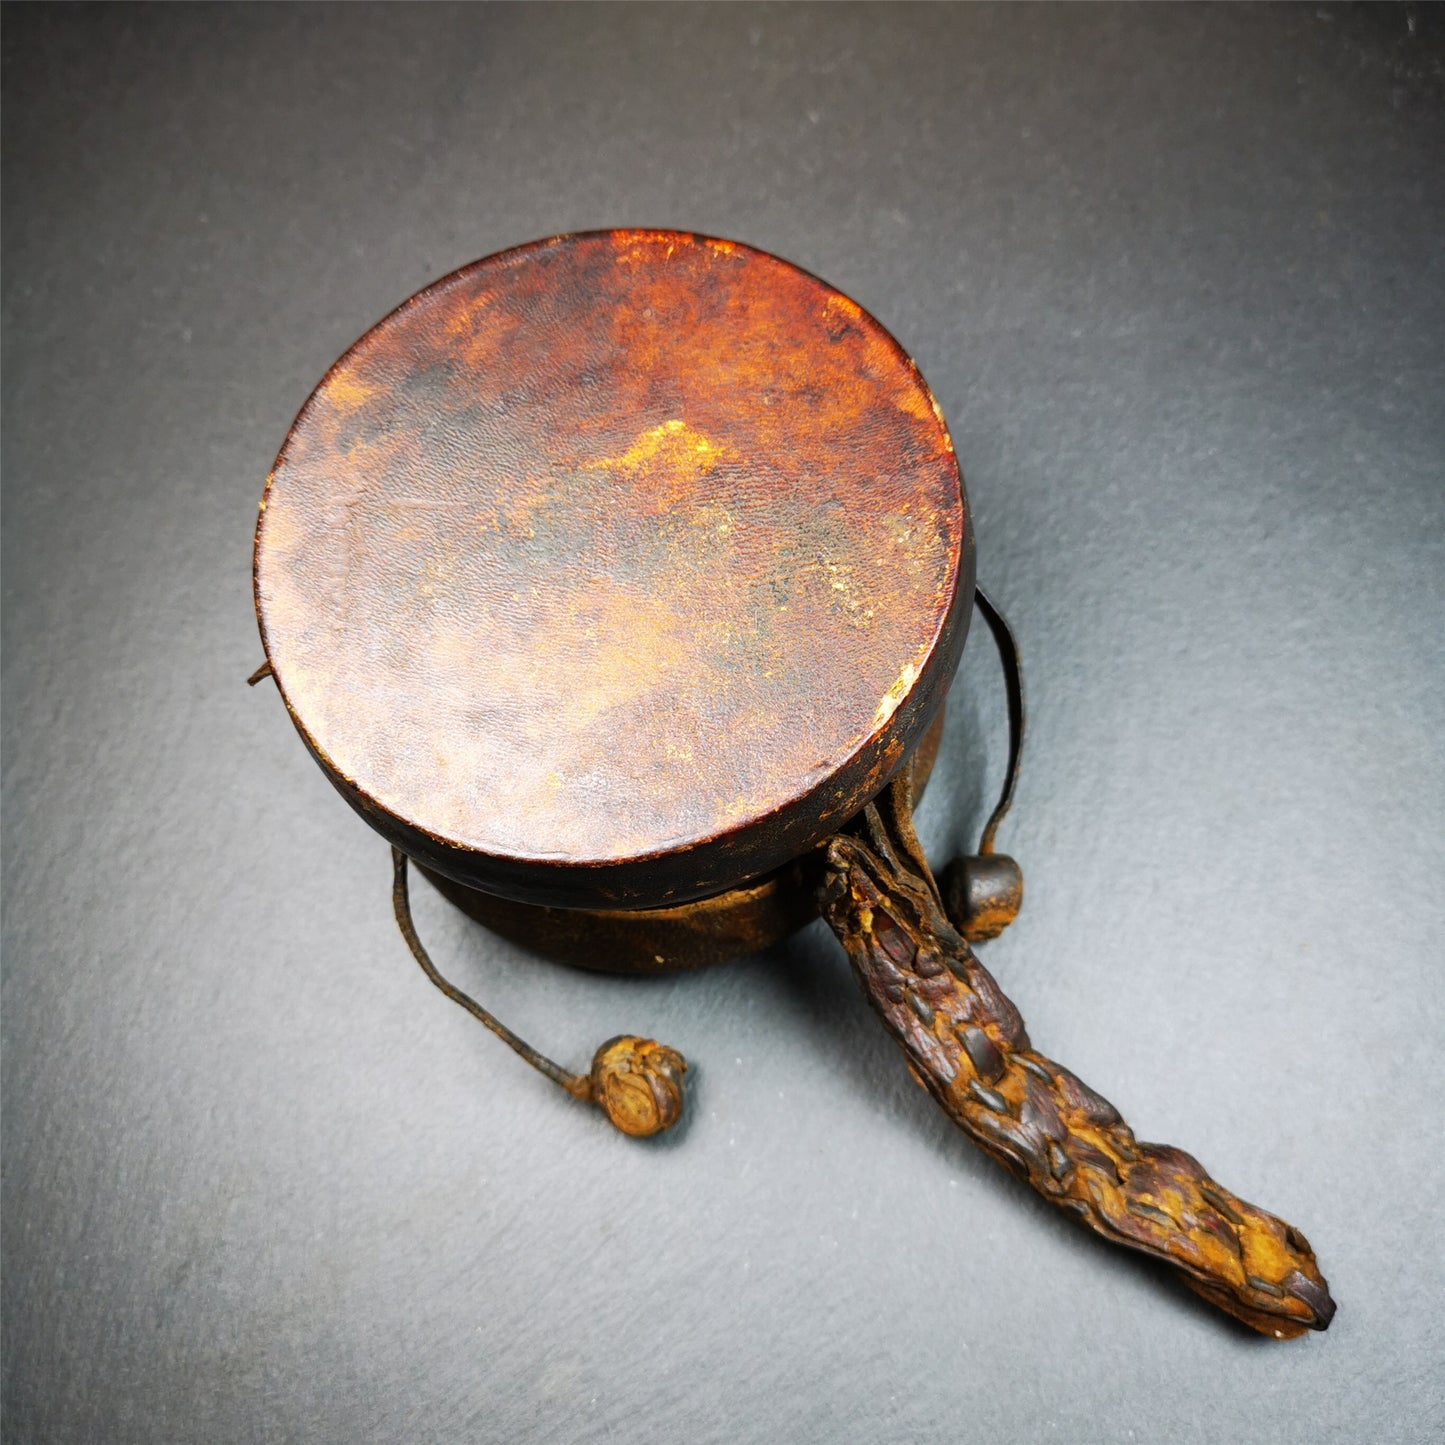 This Old Damaru Chod Drum was collected from a vallage in Gerze Tibet,about 60 years old,used and blessed by lama. It is made of Wood,Sheepskin and leather cord,the drumsticks are also made of leather cords, the drum skin shows different colors because one side of it was damaged and repaired long time ago.